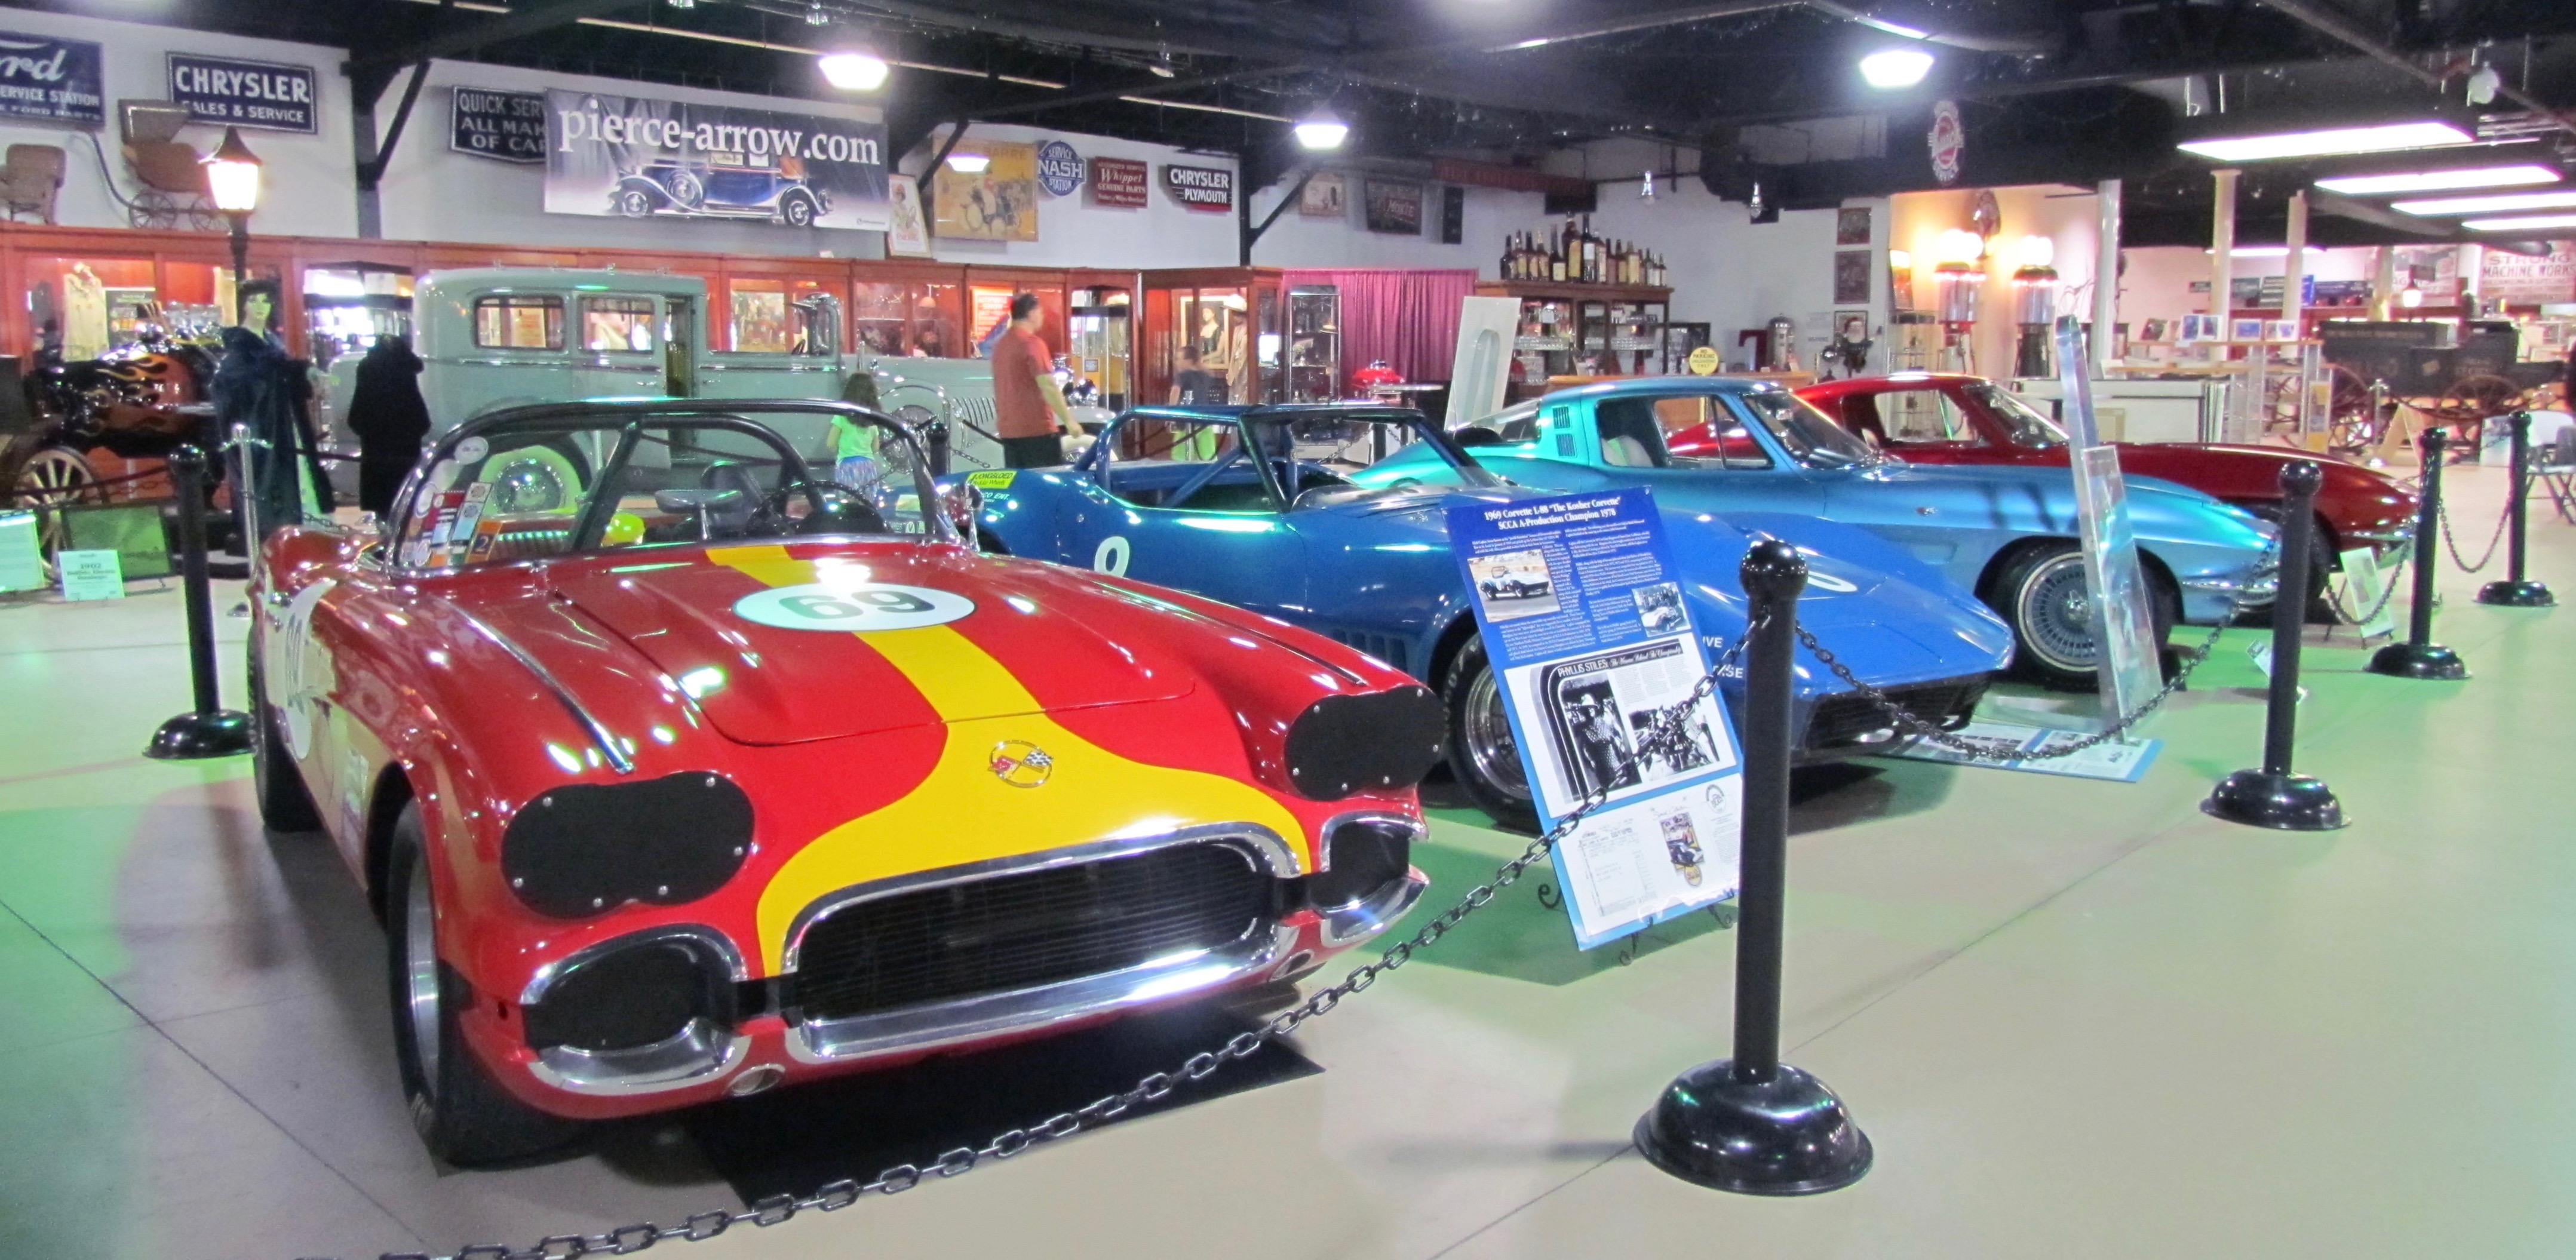 Buffalo car museum, Jim Sandoro and his museum are giving back to his hometown, ClassicCars.com Journal